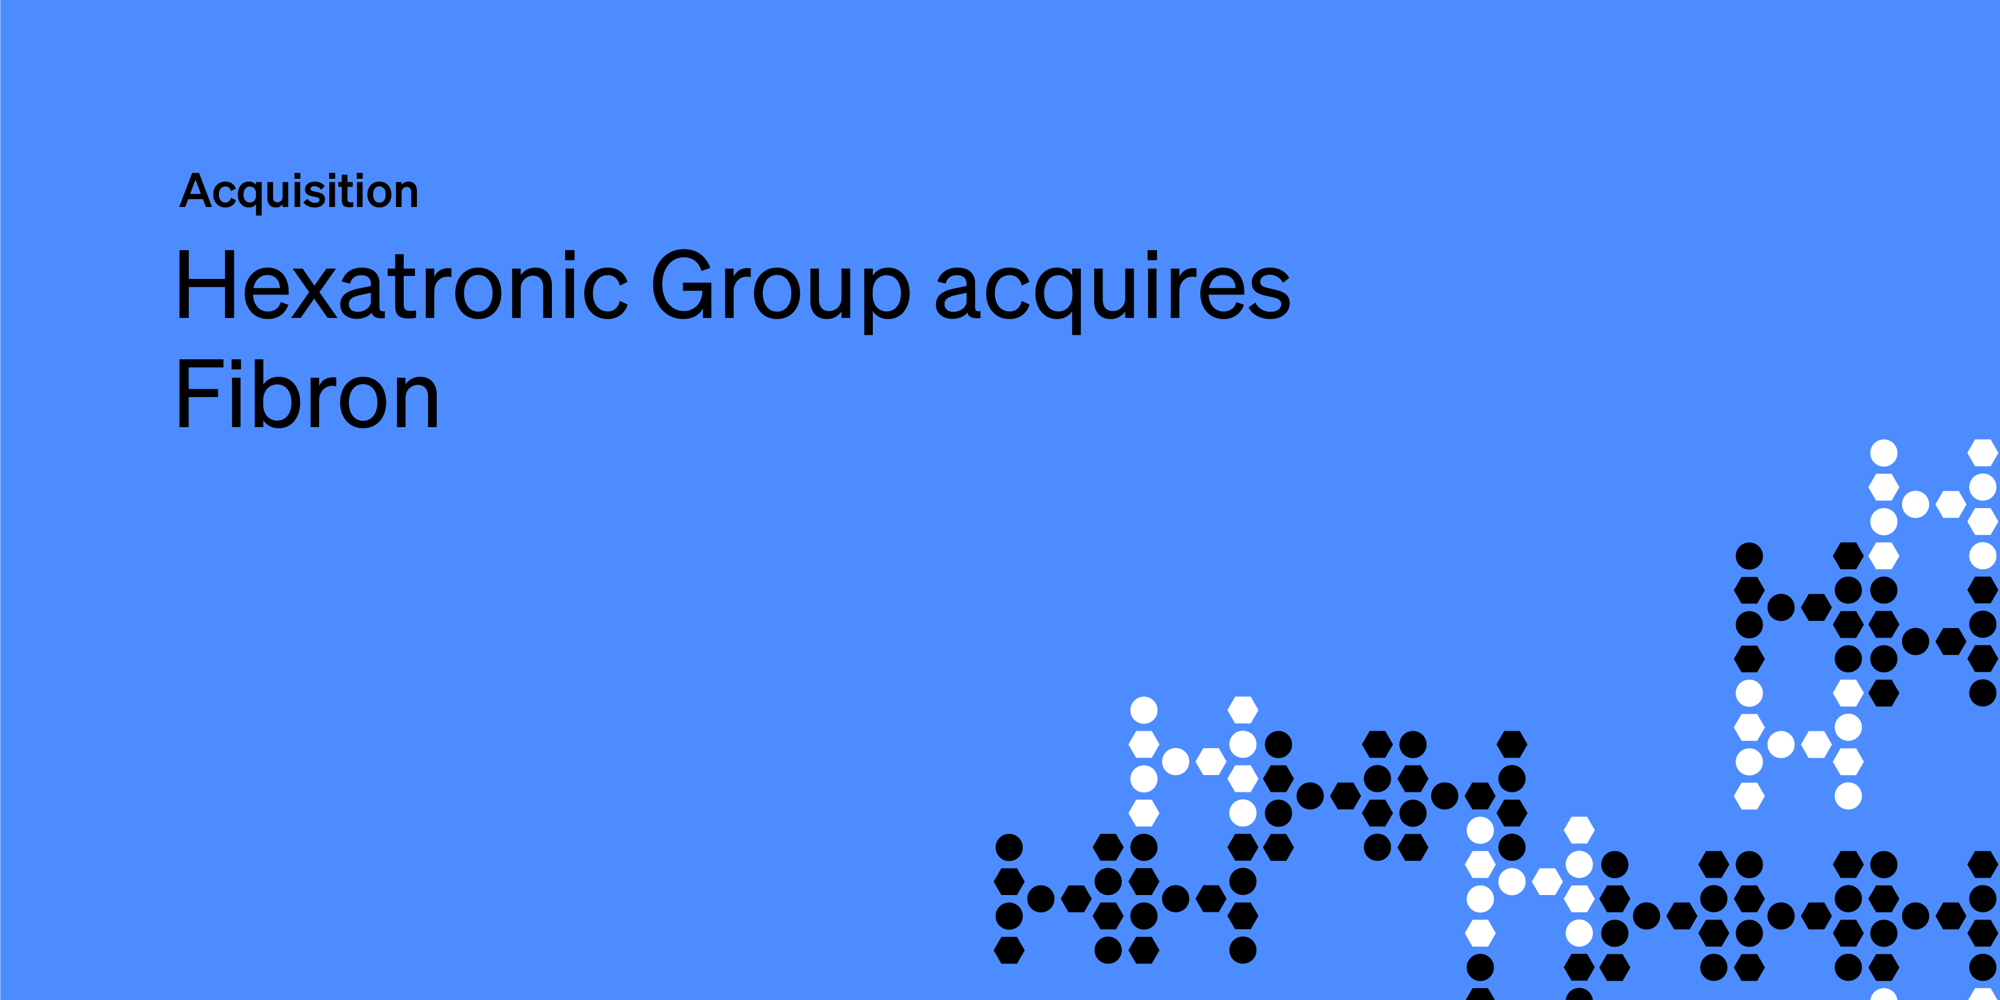 Hexatronic signs an agreement to acquire Fibron from Rubicon Partners and strengthens its position in Harsh Environments